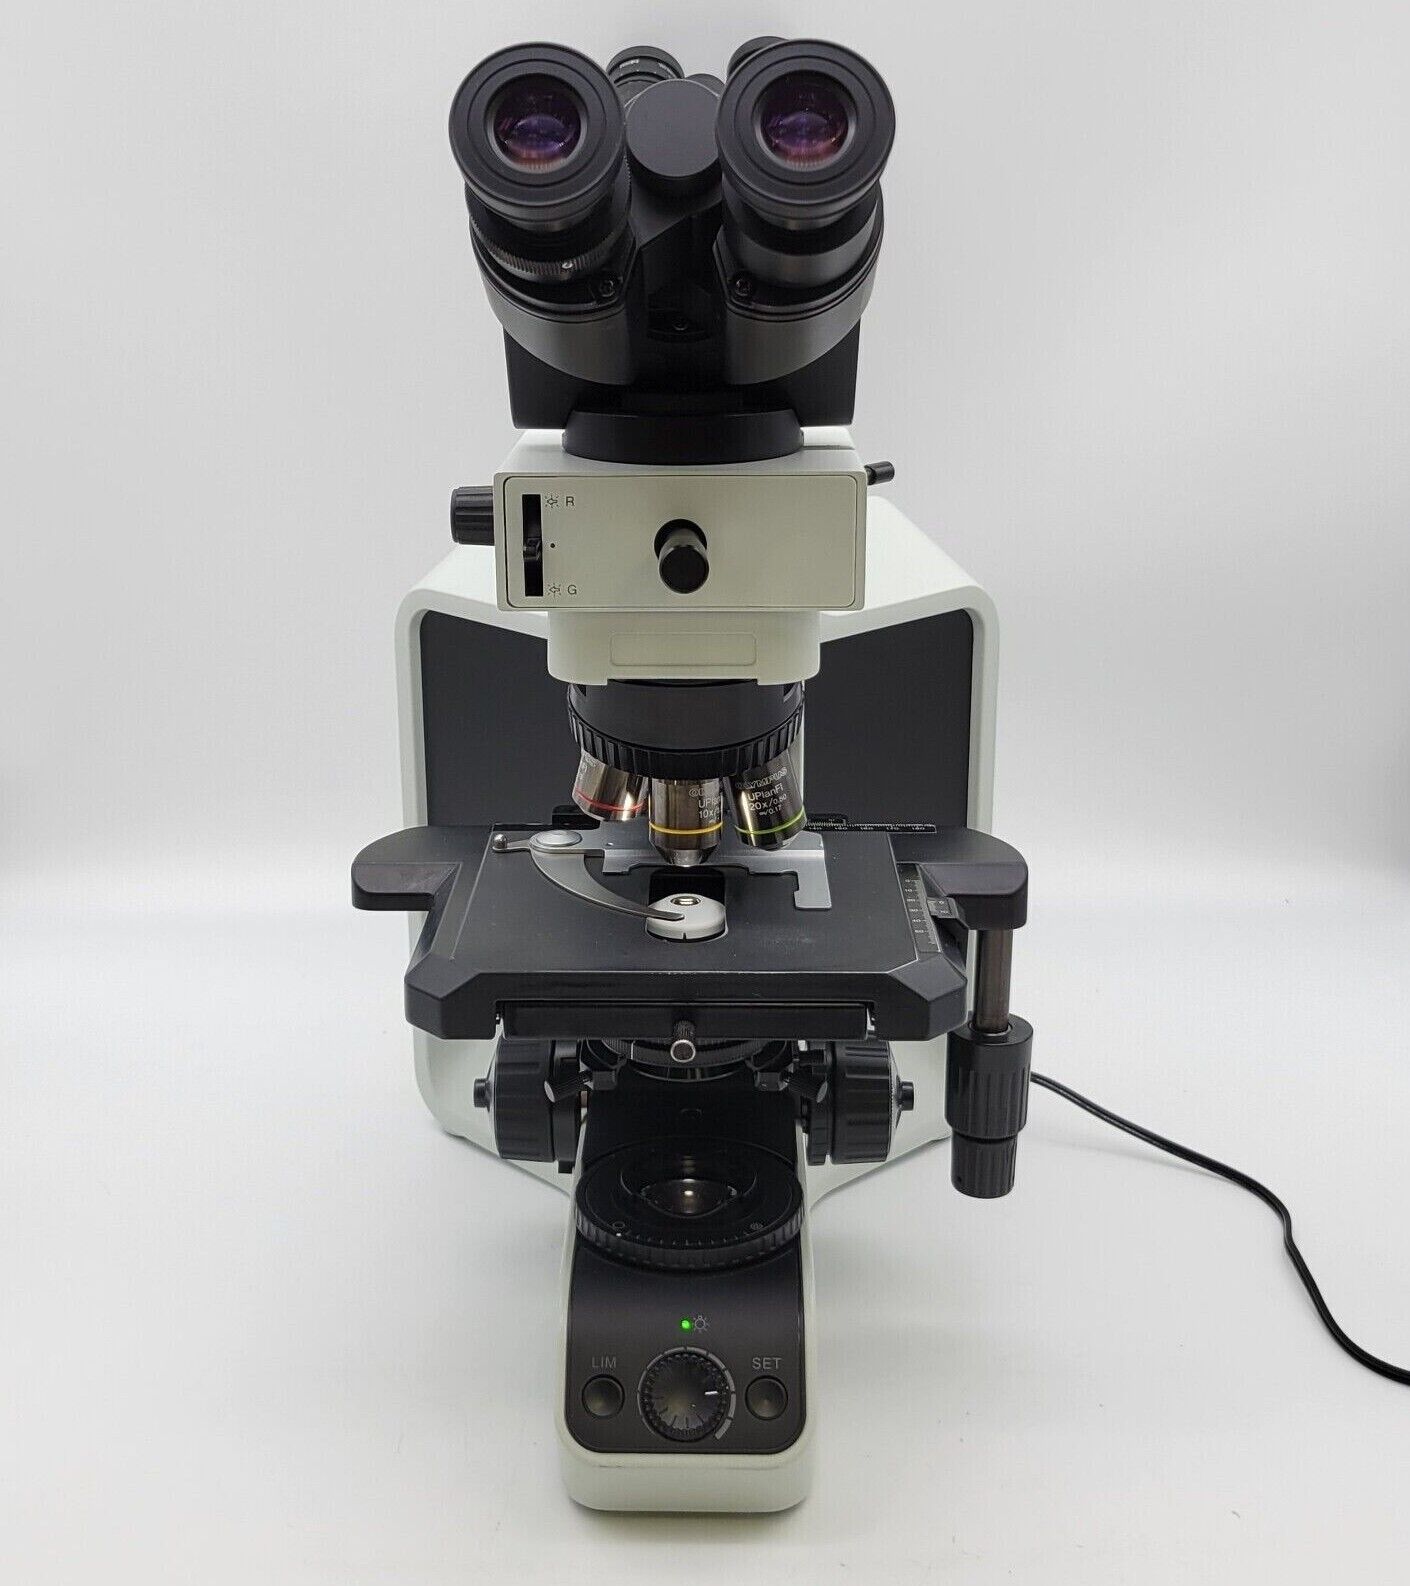 Olympus Microscope BX43 with Fluorites and Front to Back Bridge for Pathology - microscopemarketplace